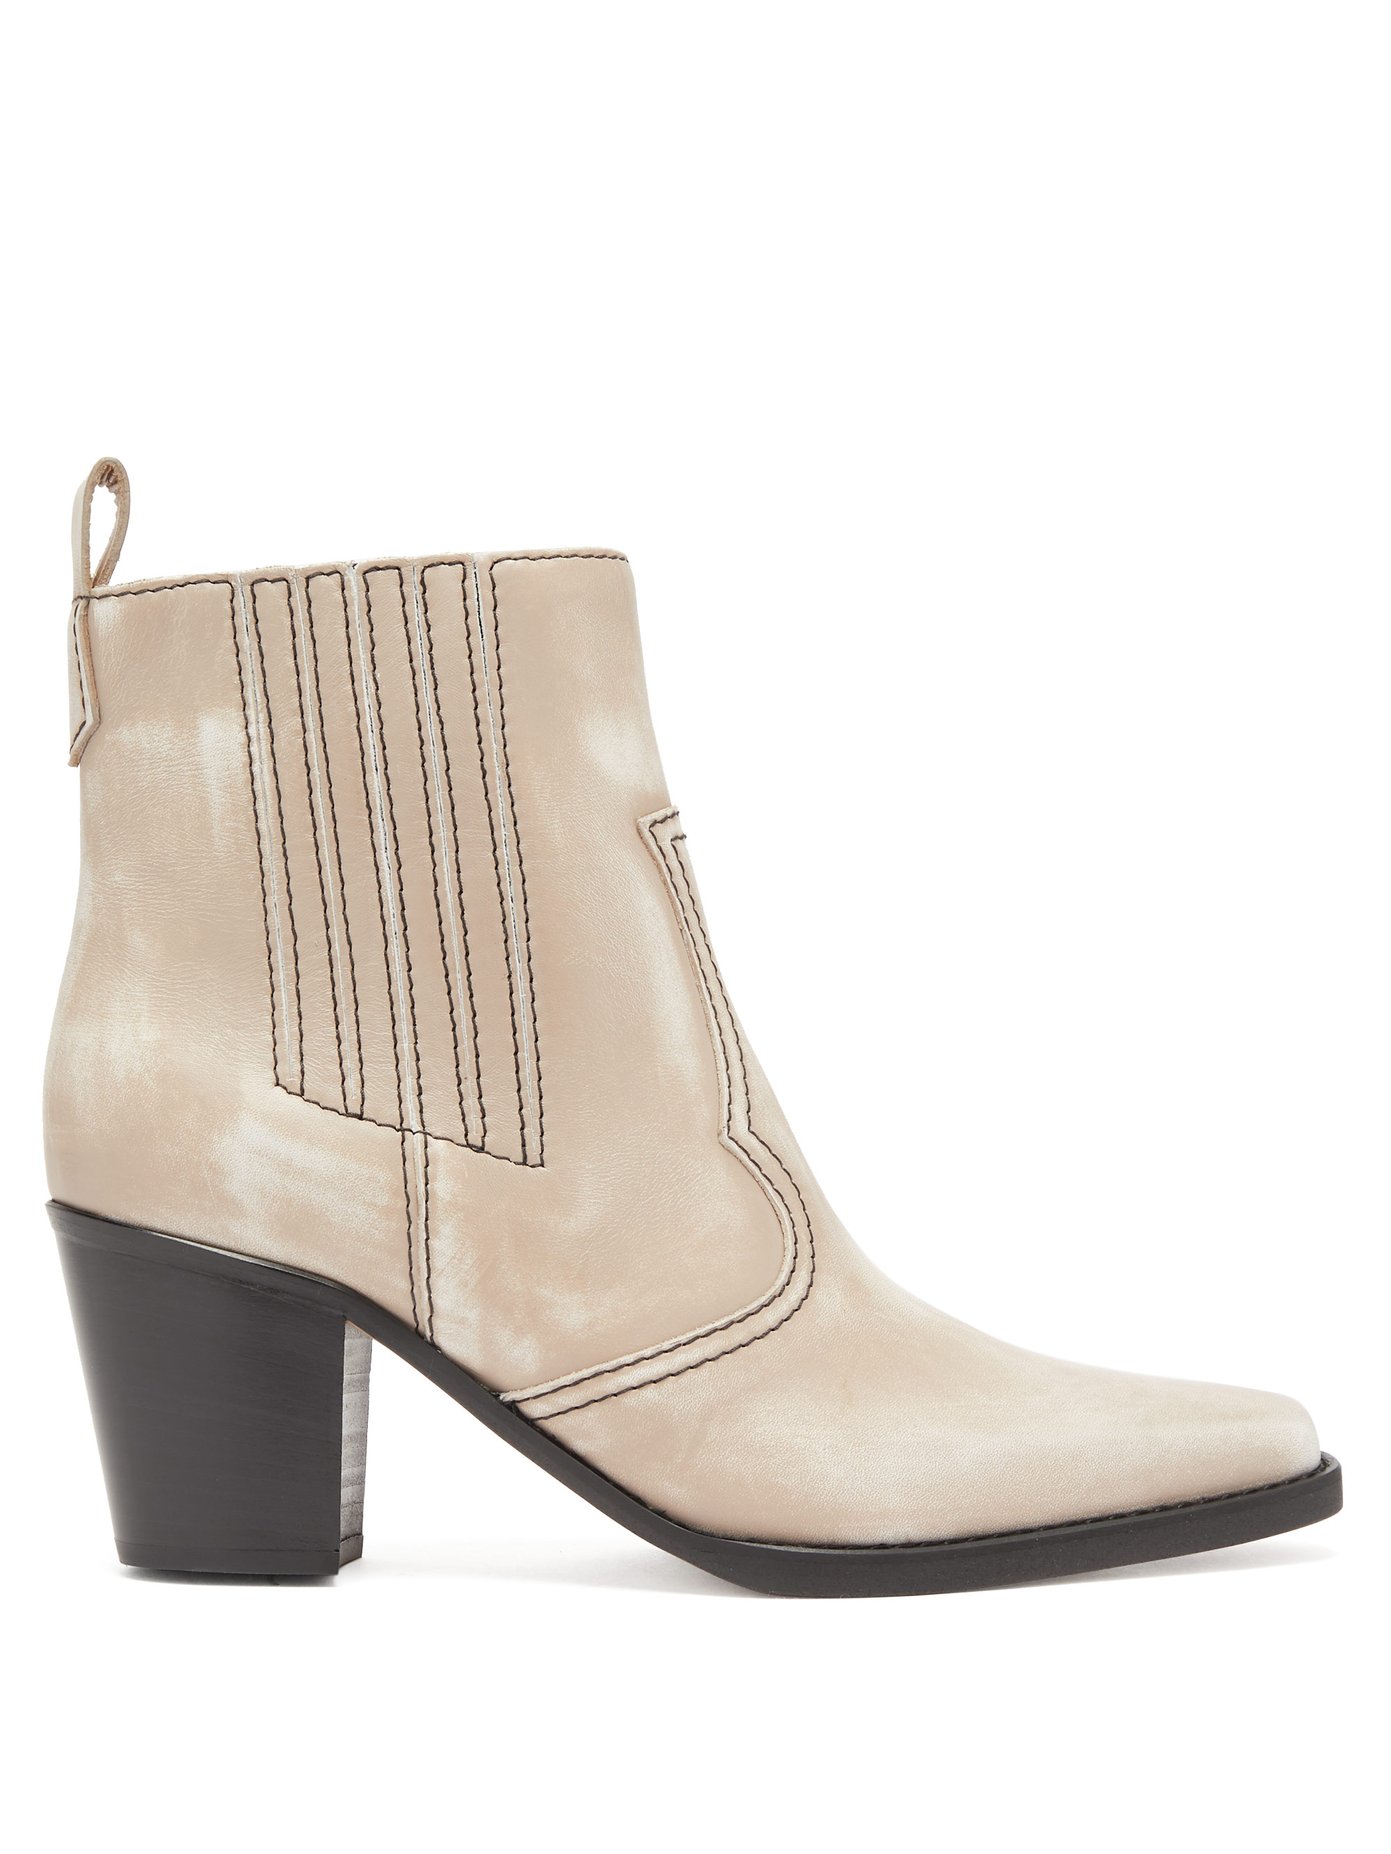 western ankle boots uk